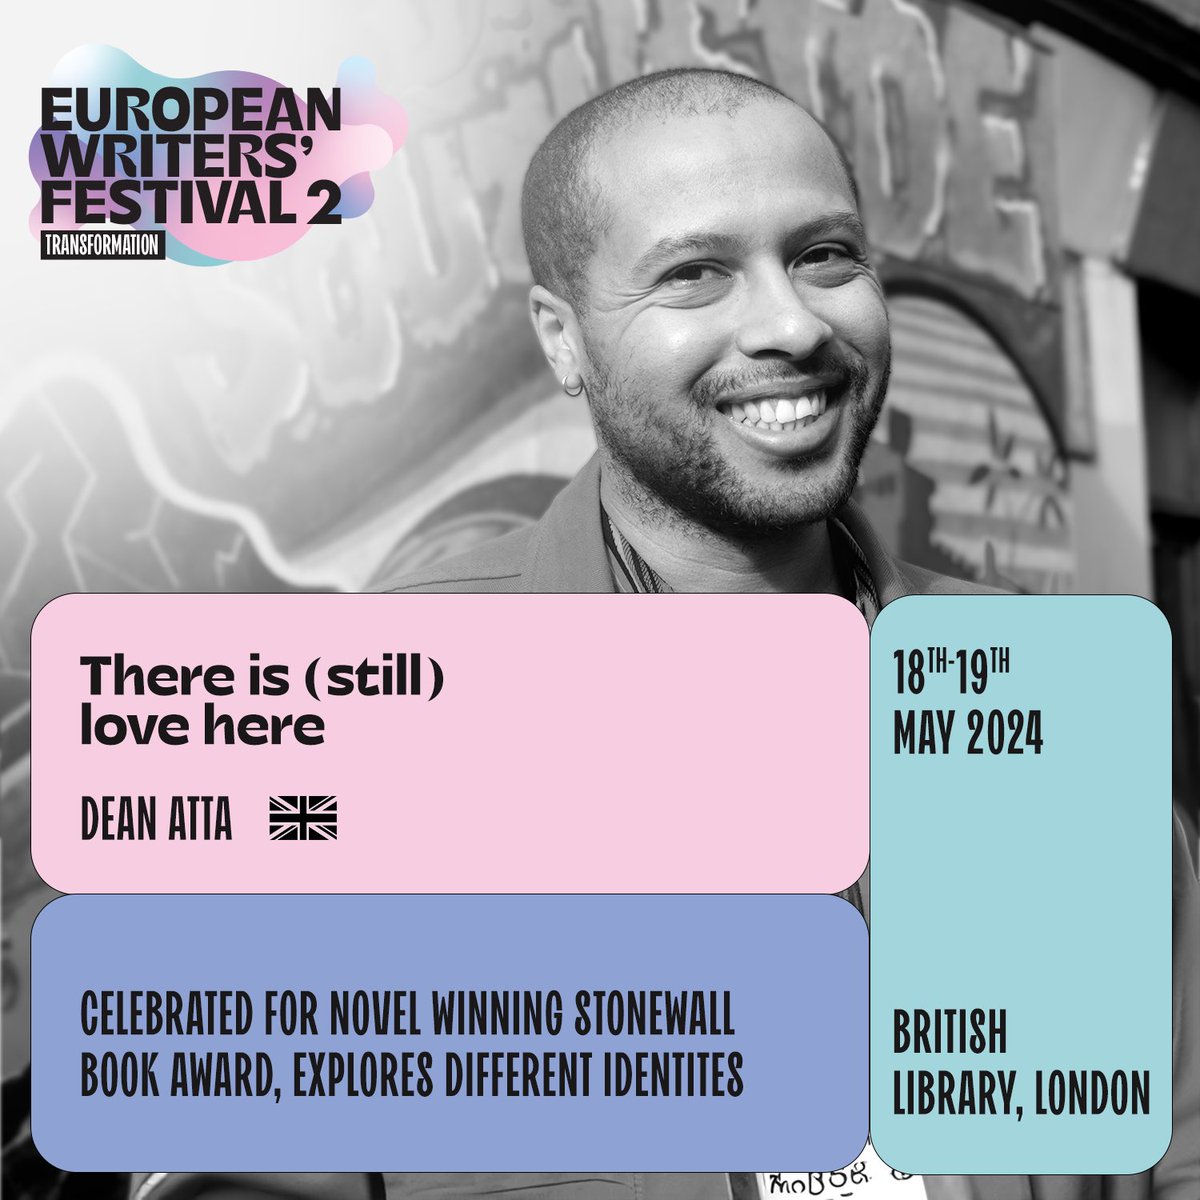 @DeanAtta has been called “a poet of the finest order, a most tender, passionate and powerful voice, a light in the twenty-first century” by @salenagodden and his work “There is (still) love here” has been called vulnerable, tender, openhearted and life-affirming by @pascalepoet